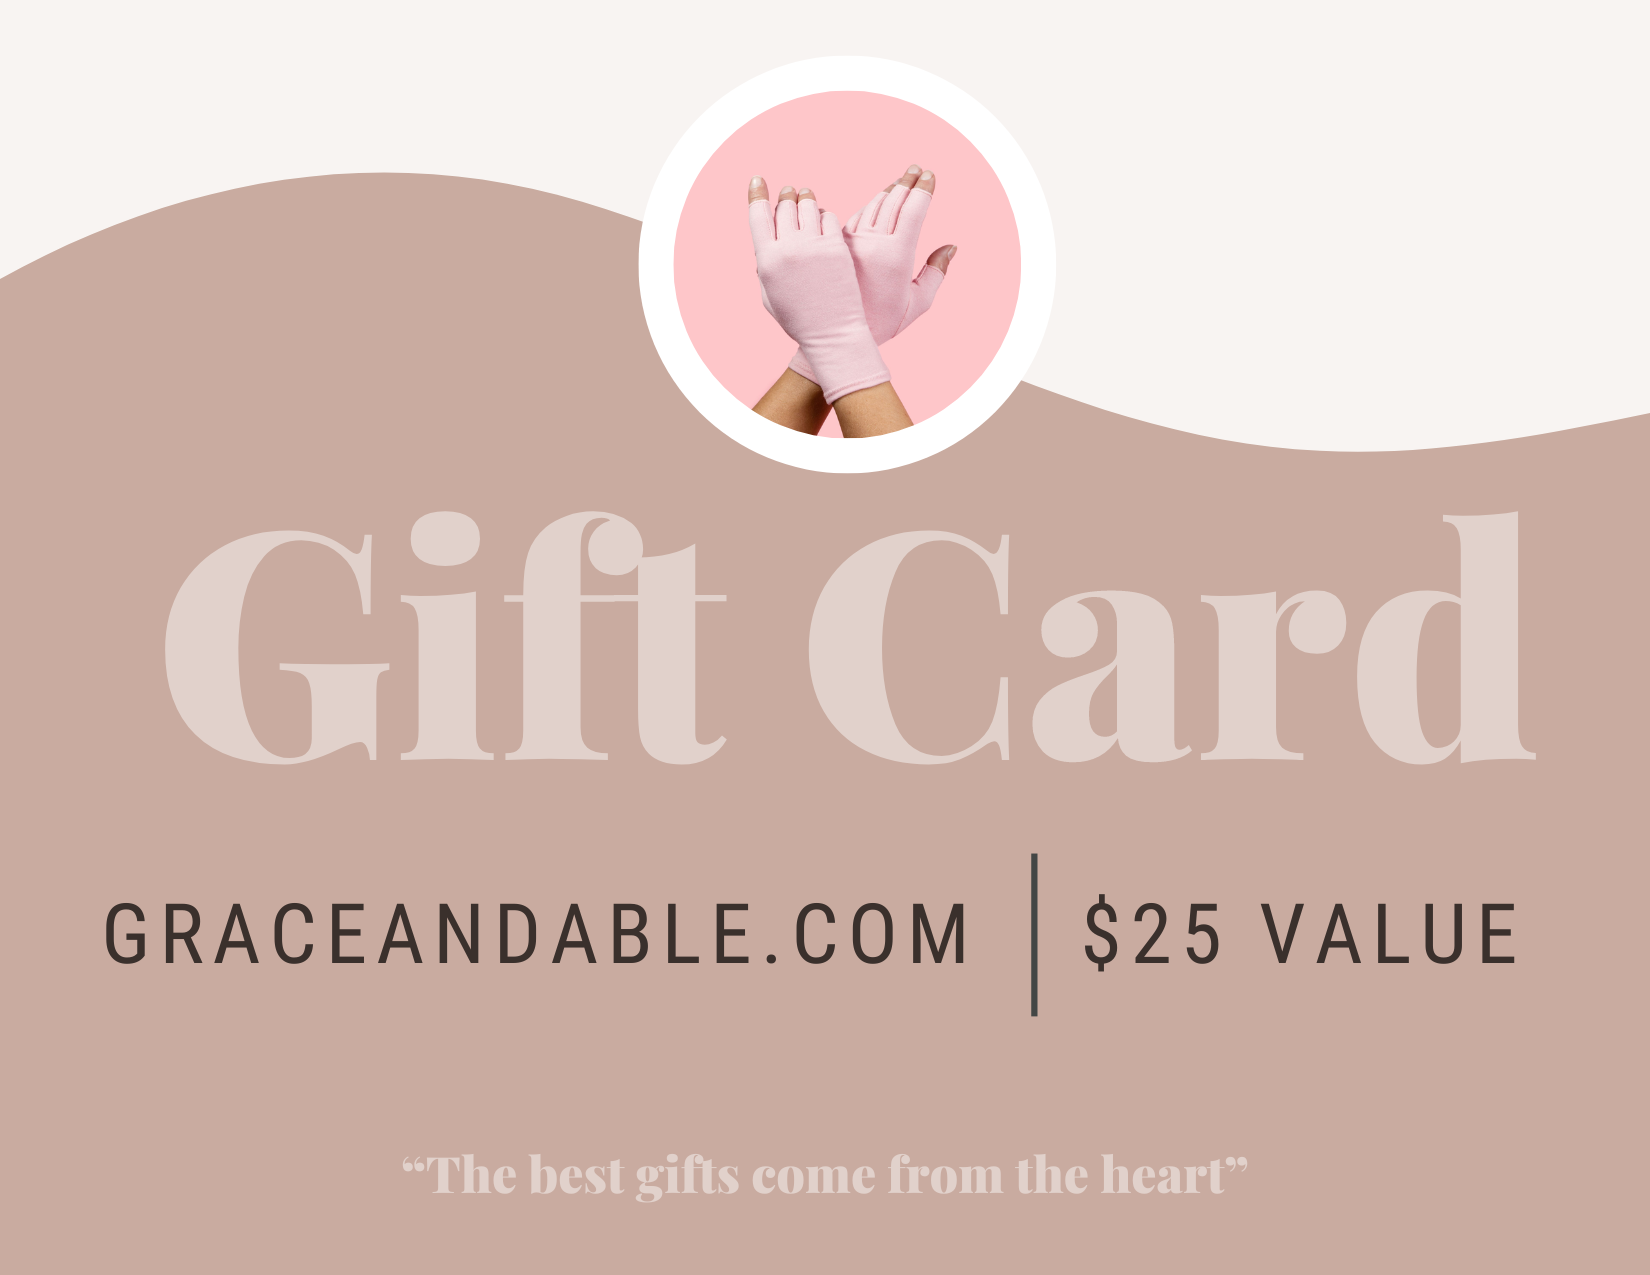 A close-up of a Grace & Able gift card with a value of $25.